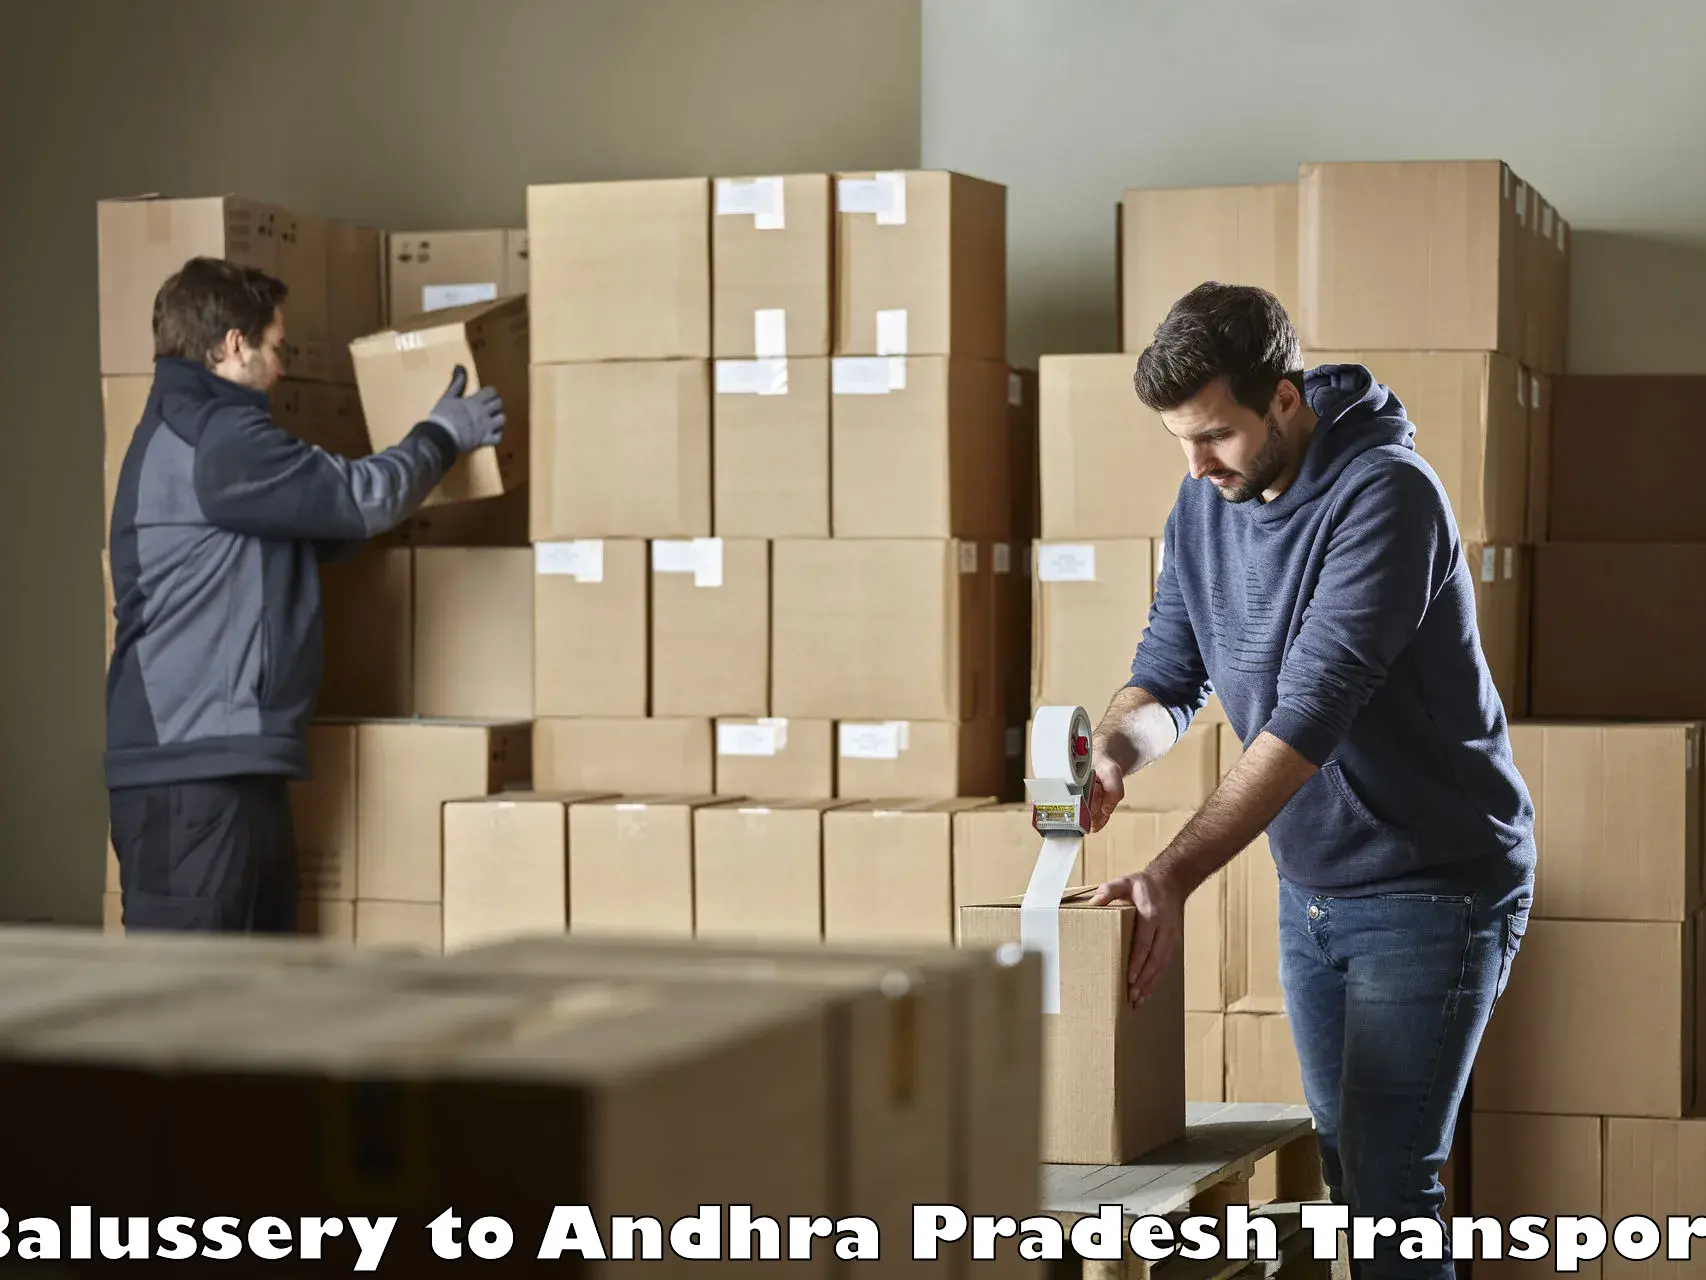 Best transport services in India Balussery to Markapur